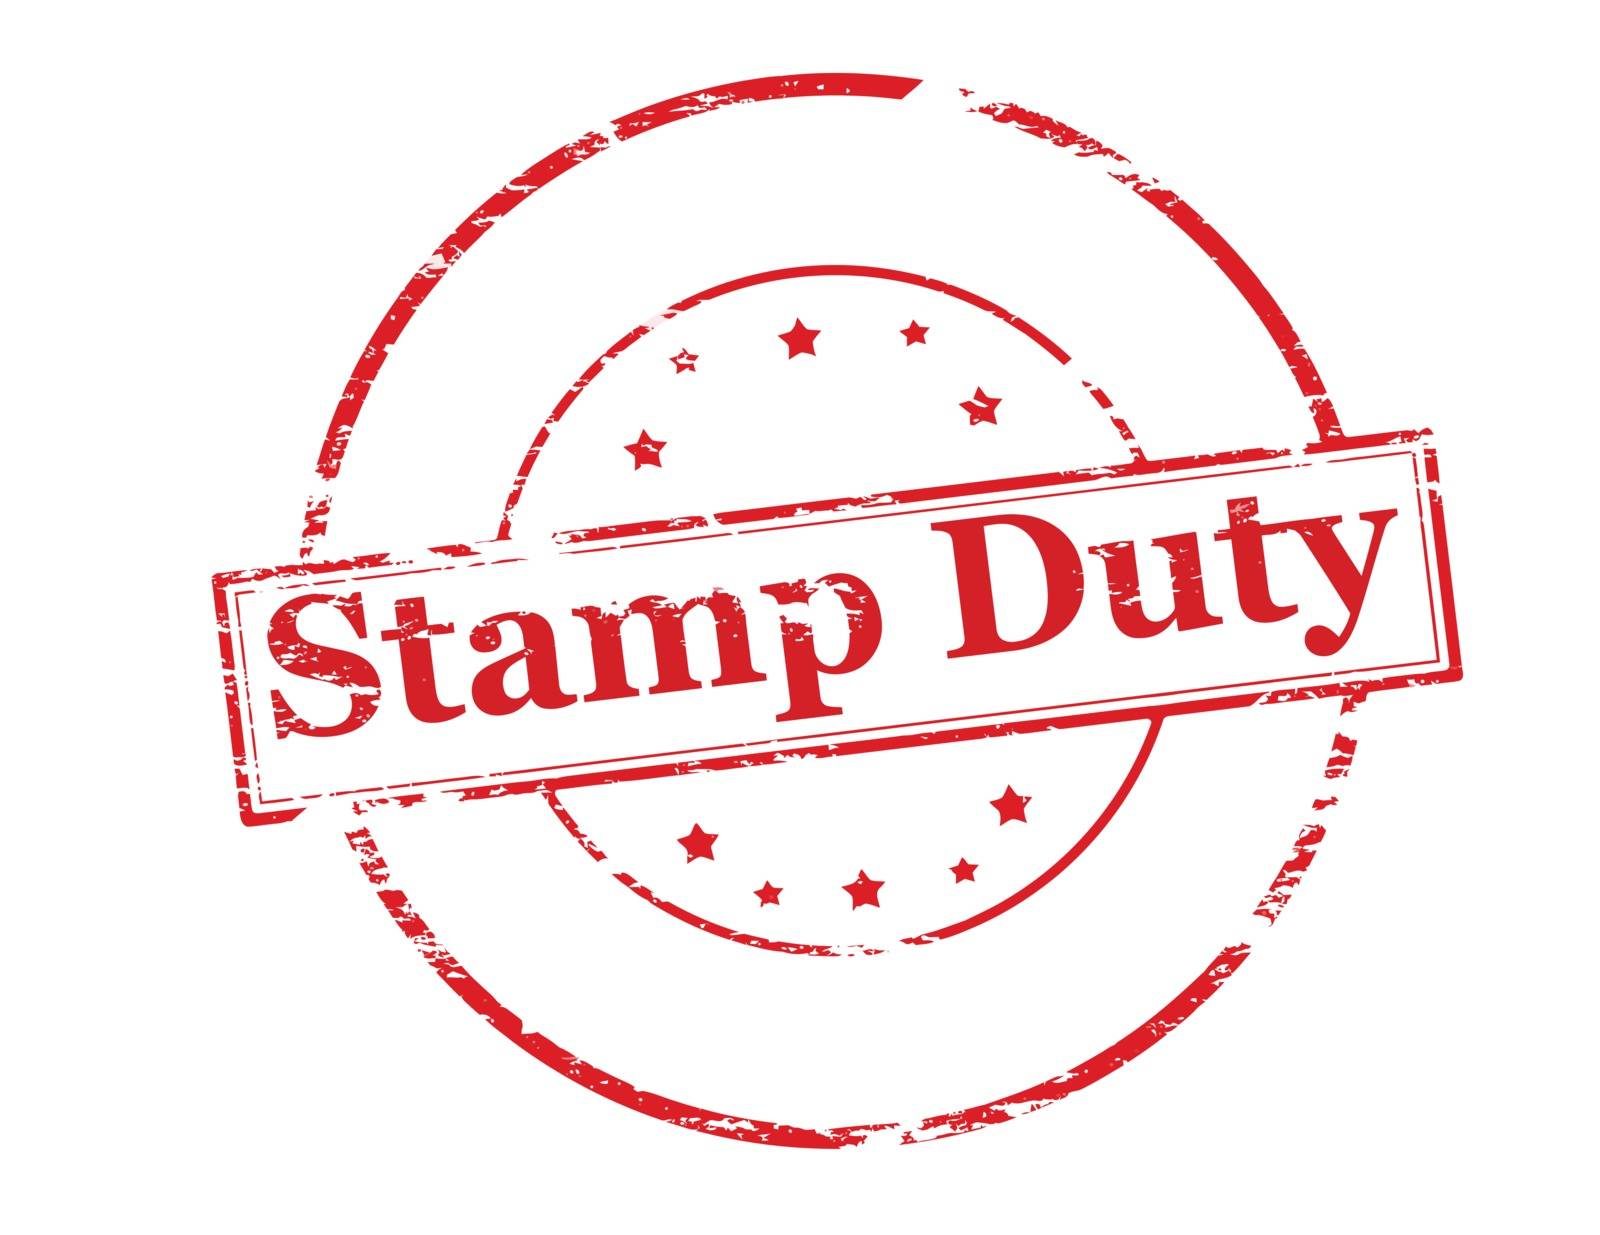 Rubber stamp with text stamp duty inside, vector illustration